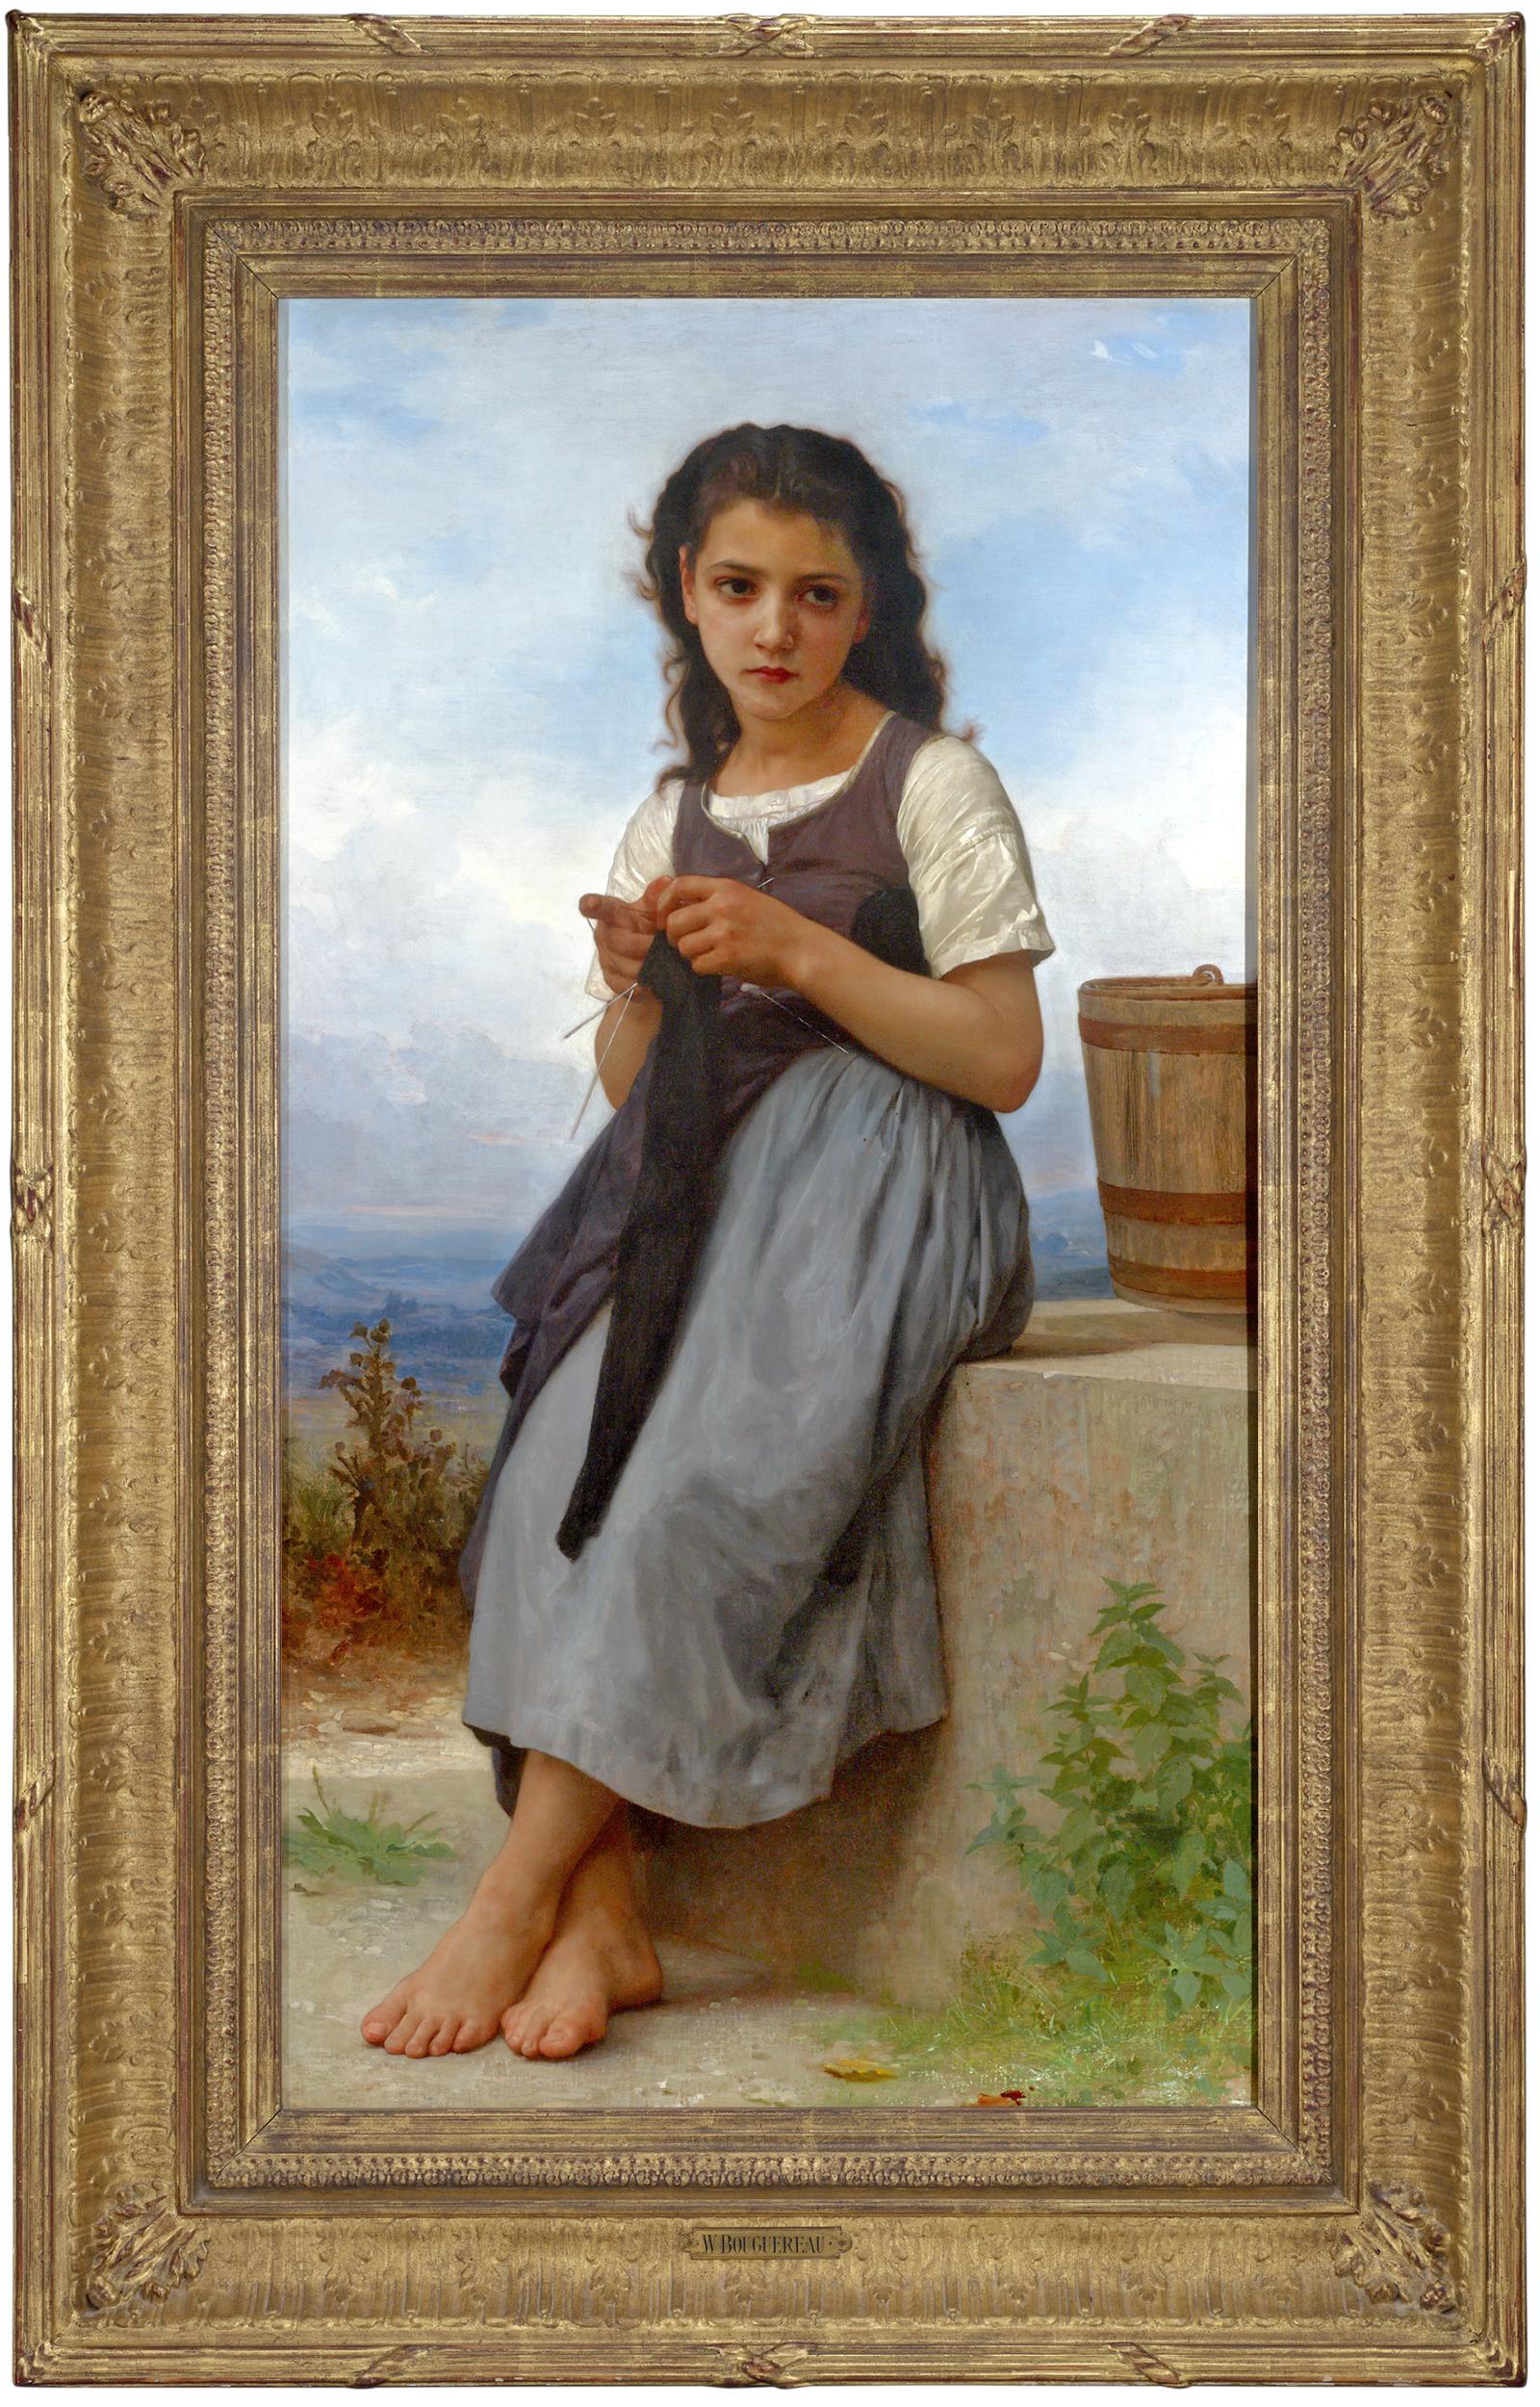 La tricoteuse (The Knitting Girl) - Painting by William-Adolphe Bouguereau